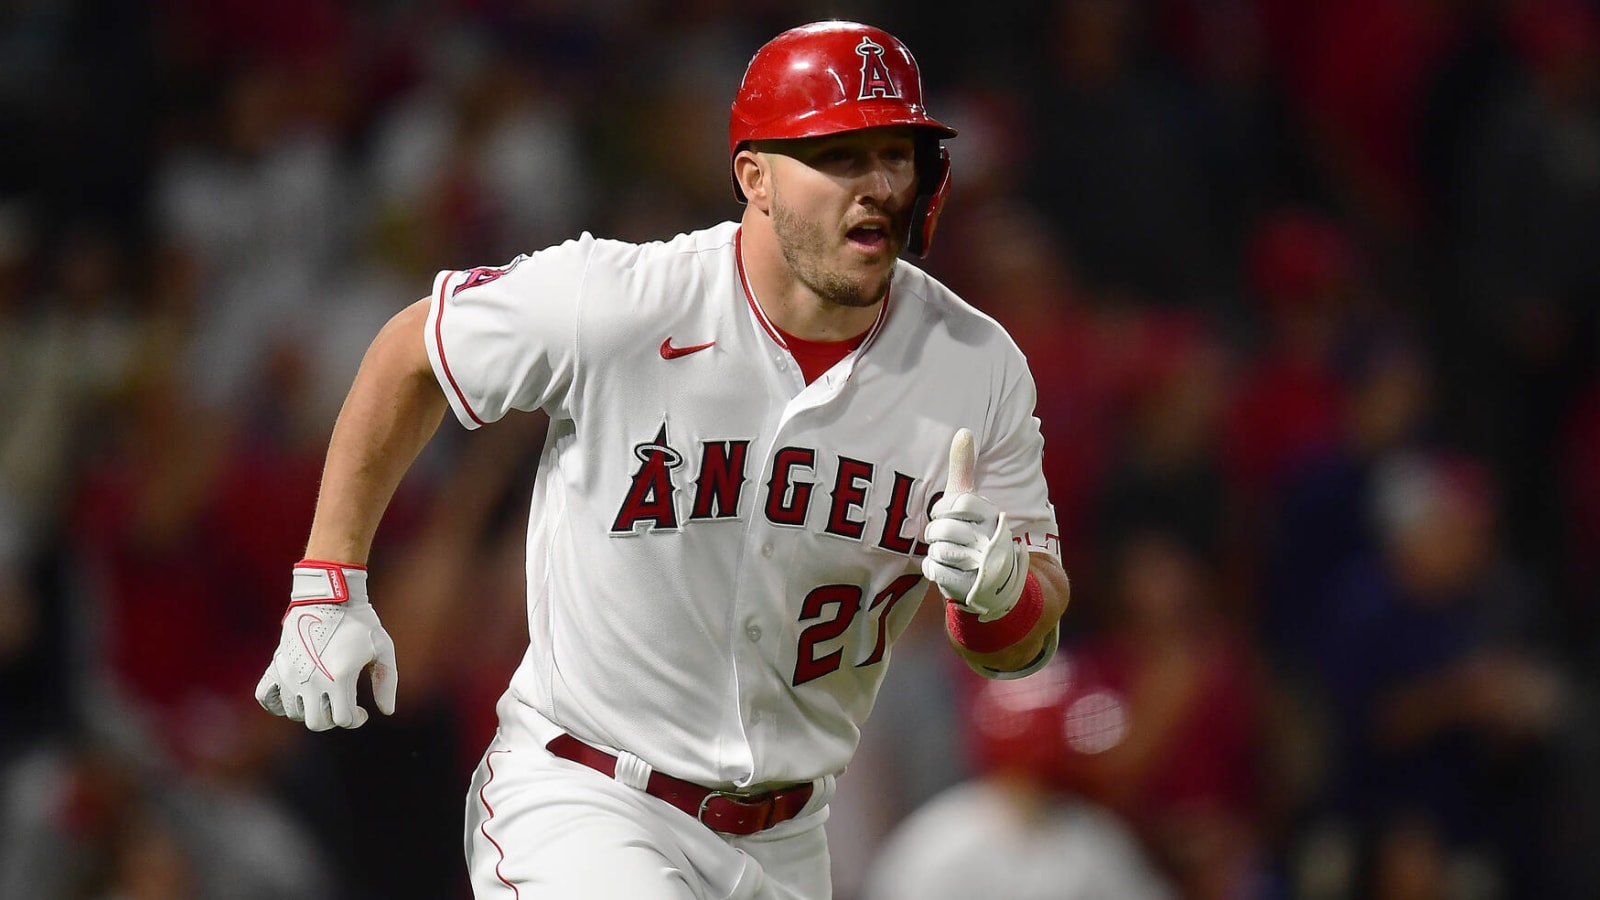 Mike Trout's surprise triple nearly made MLB history